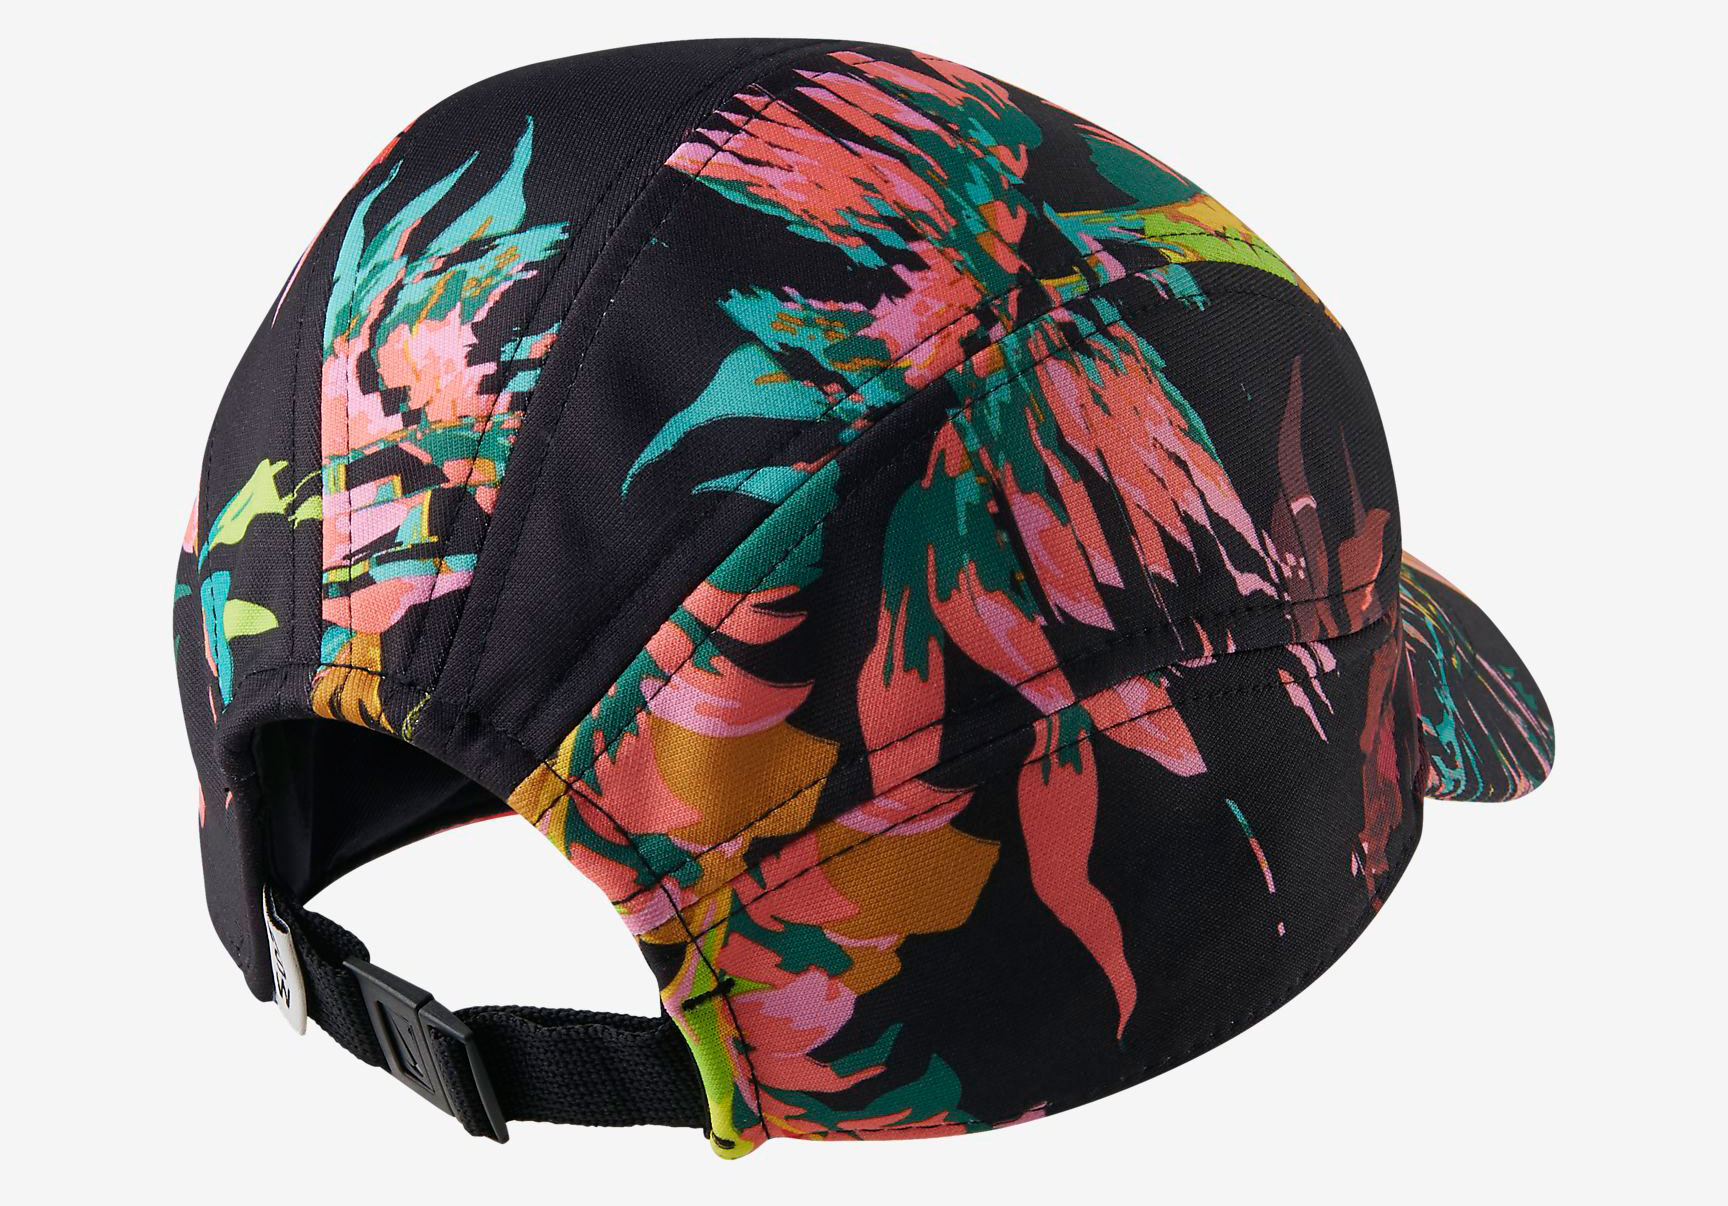 nike tailwind floral hat